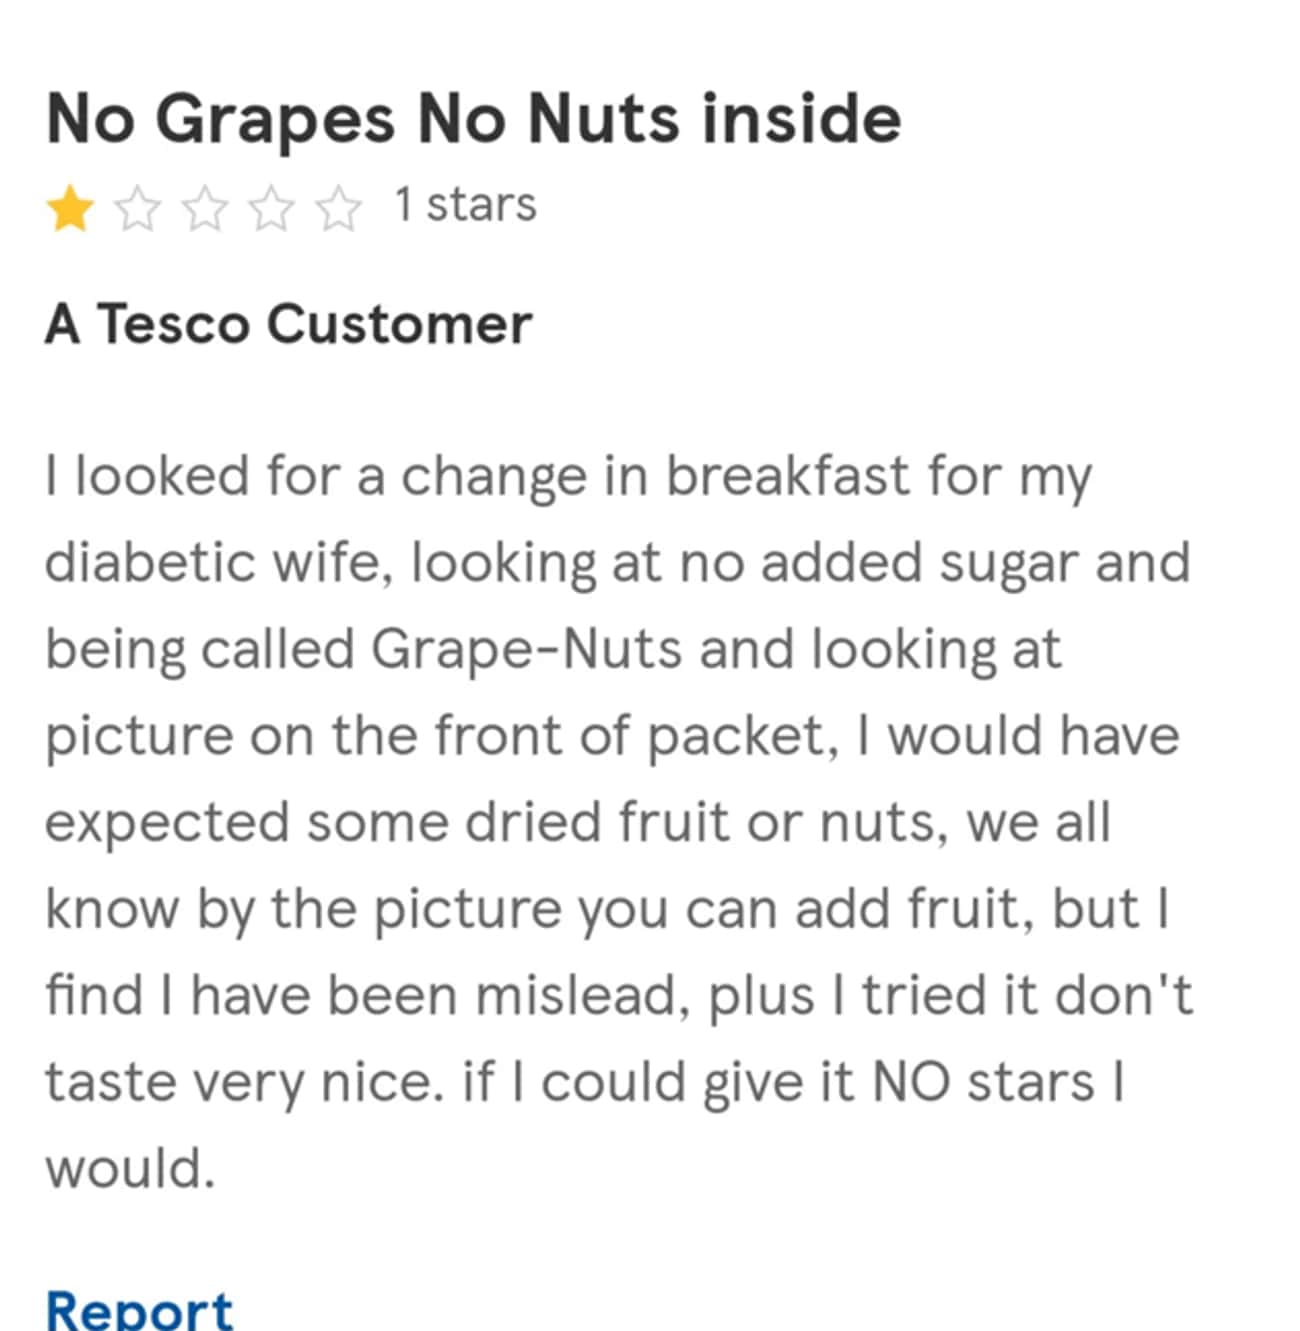 Angry That Grape-Nuts Have No Grapes Or Nuts